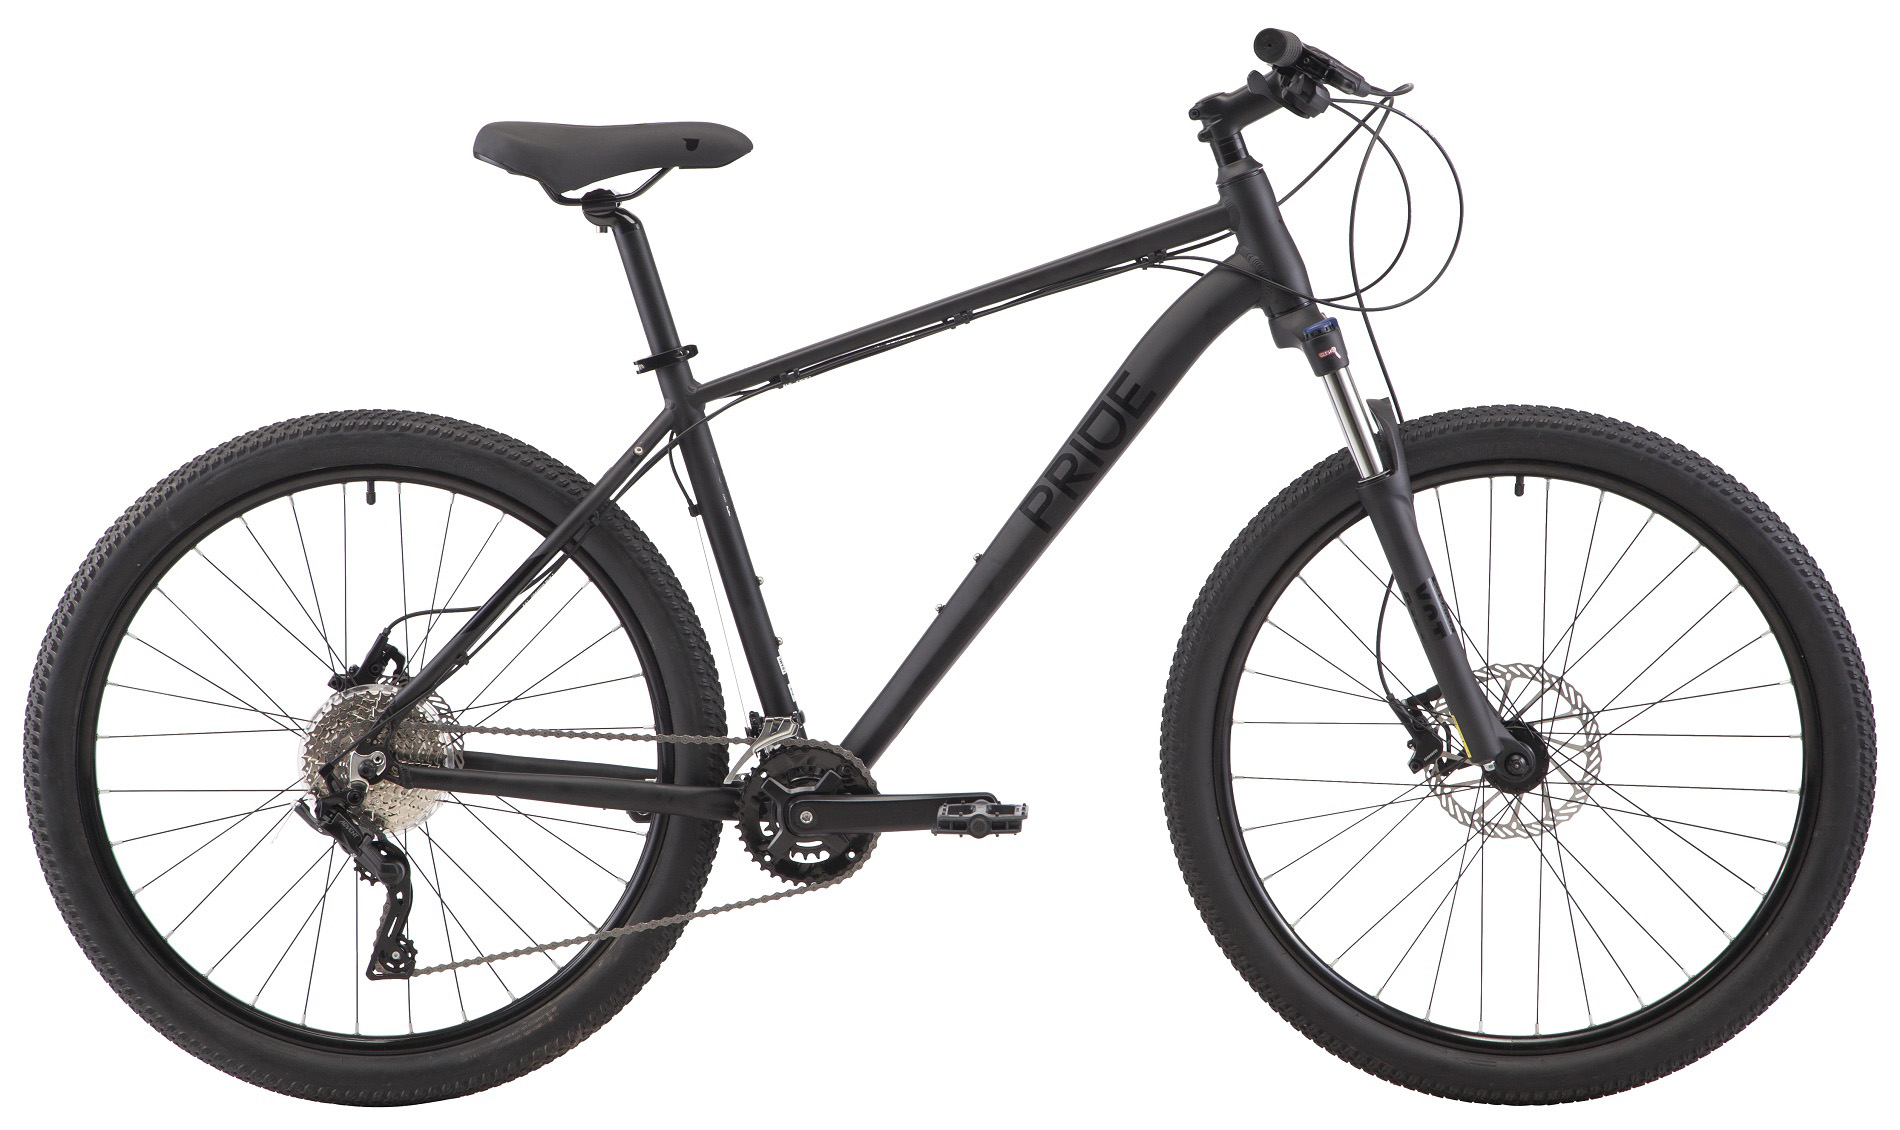 29" Pride Marvel 9.3 Frame - M 2021 Black (Sram Brakes, Rear Switch and Maintain - Microshift) Photo